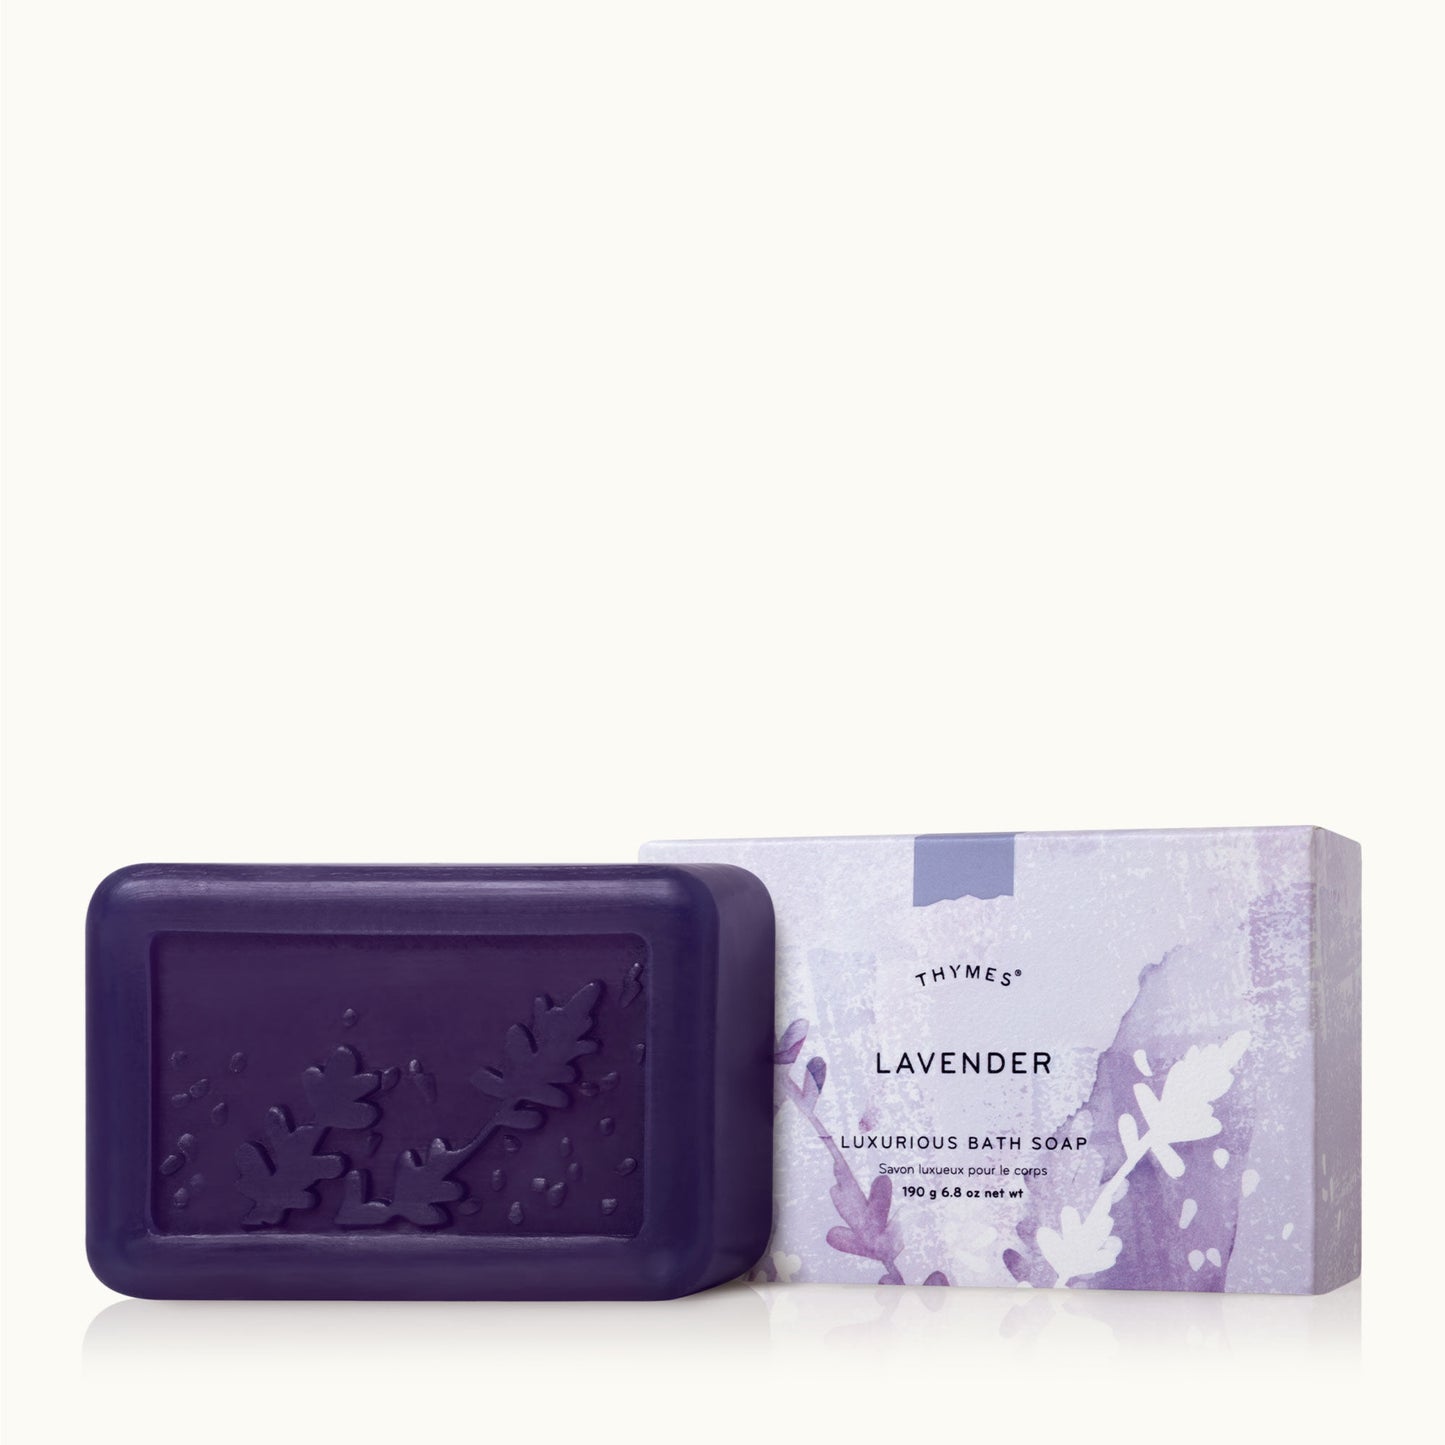 Lavender Luxurious Bath Soap Tranquil Bliss in Every Lather